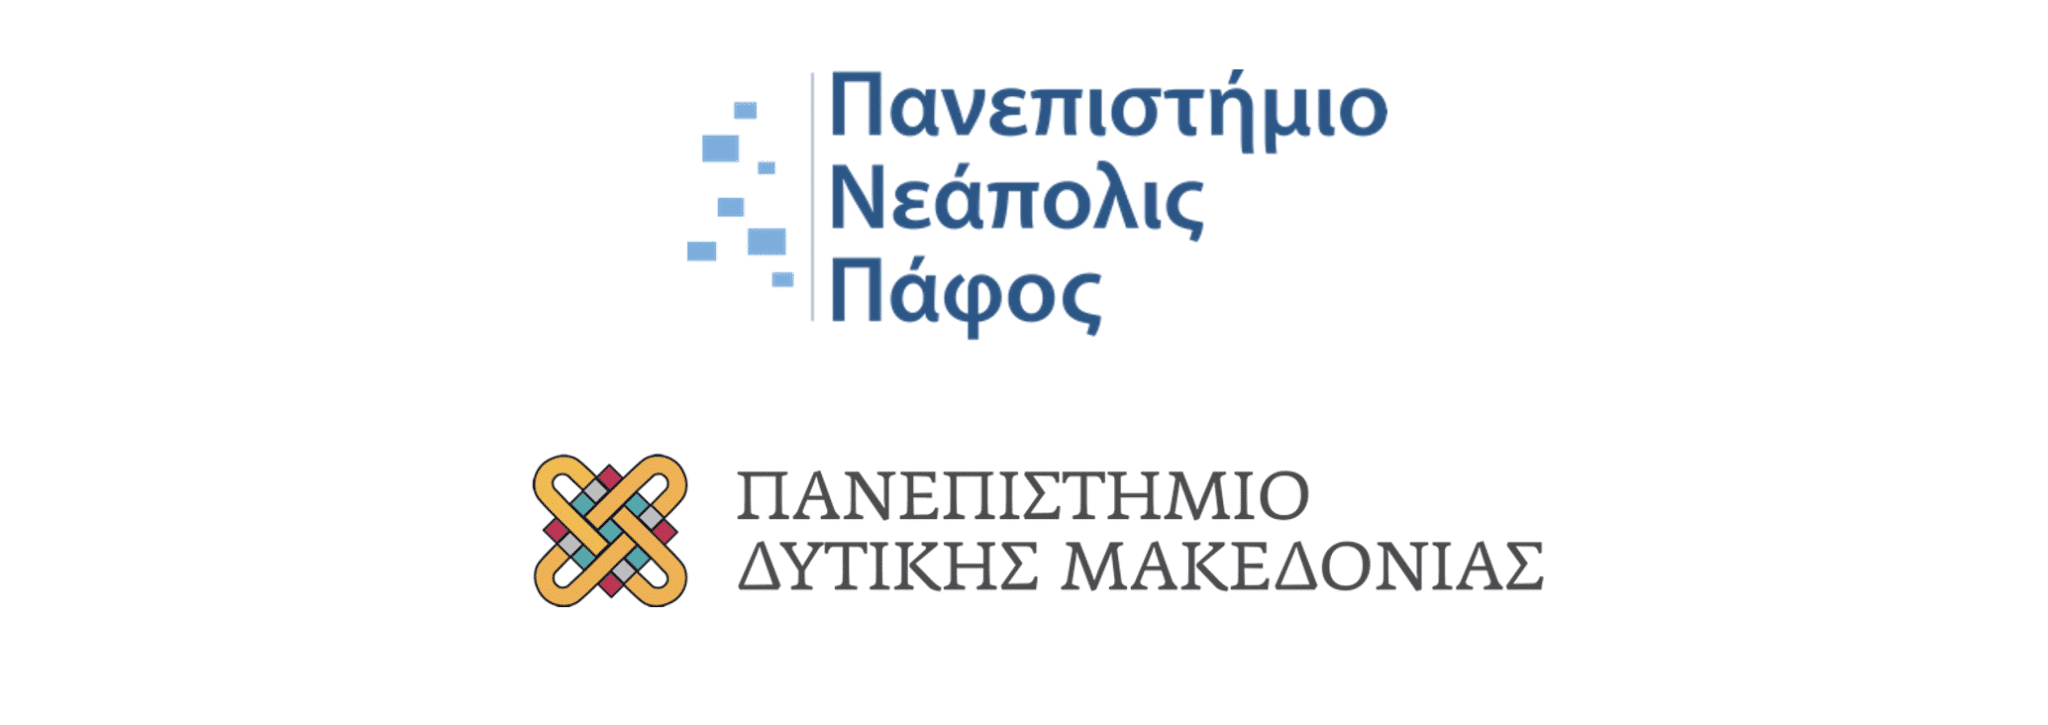 uowm and nup logos greek